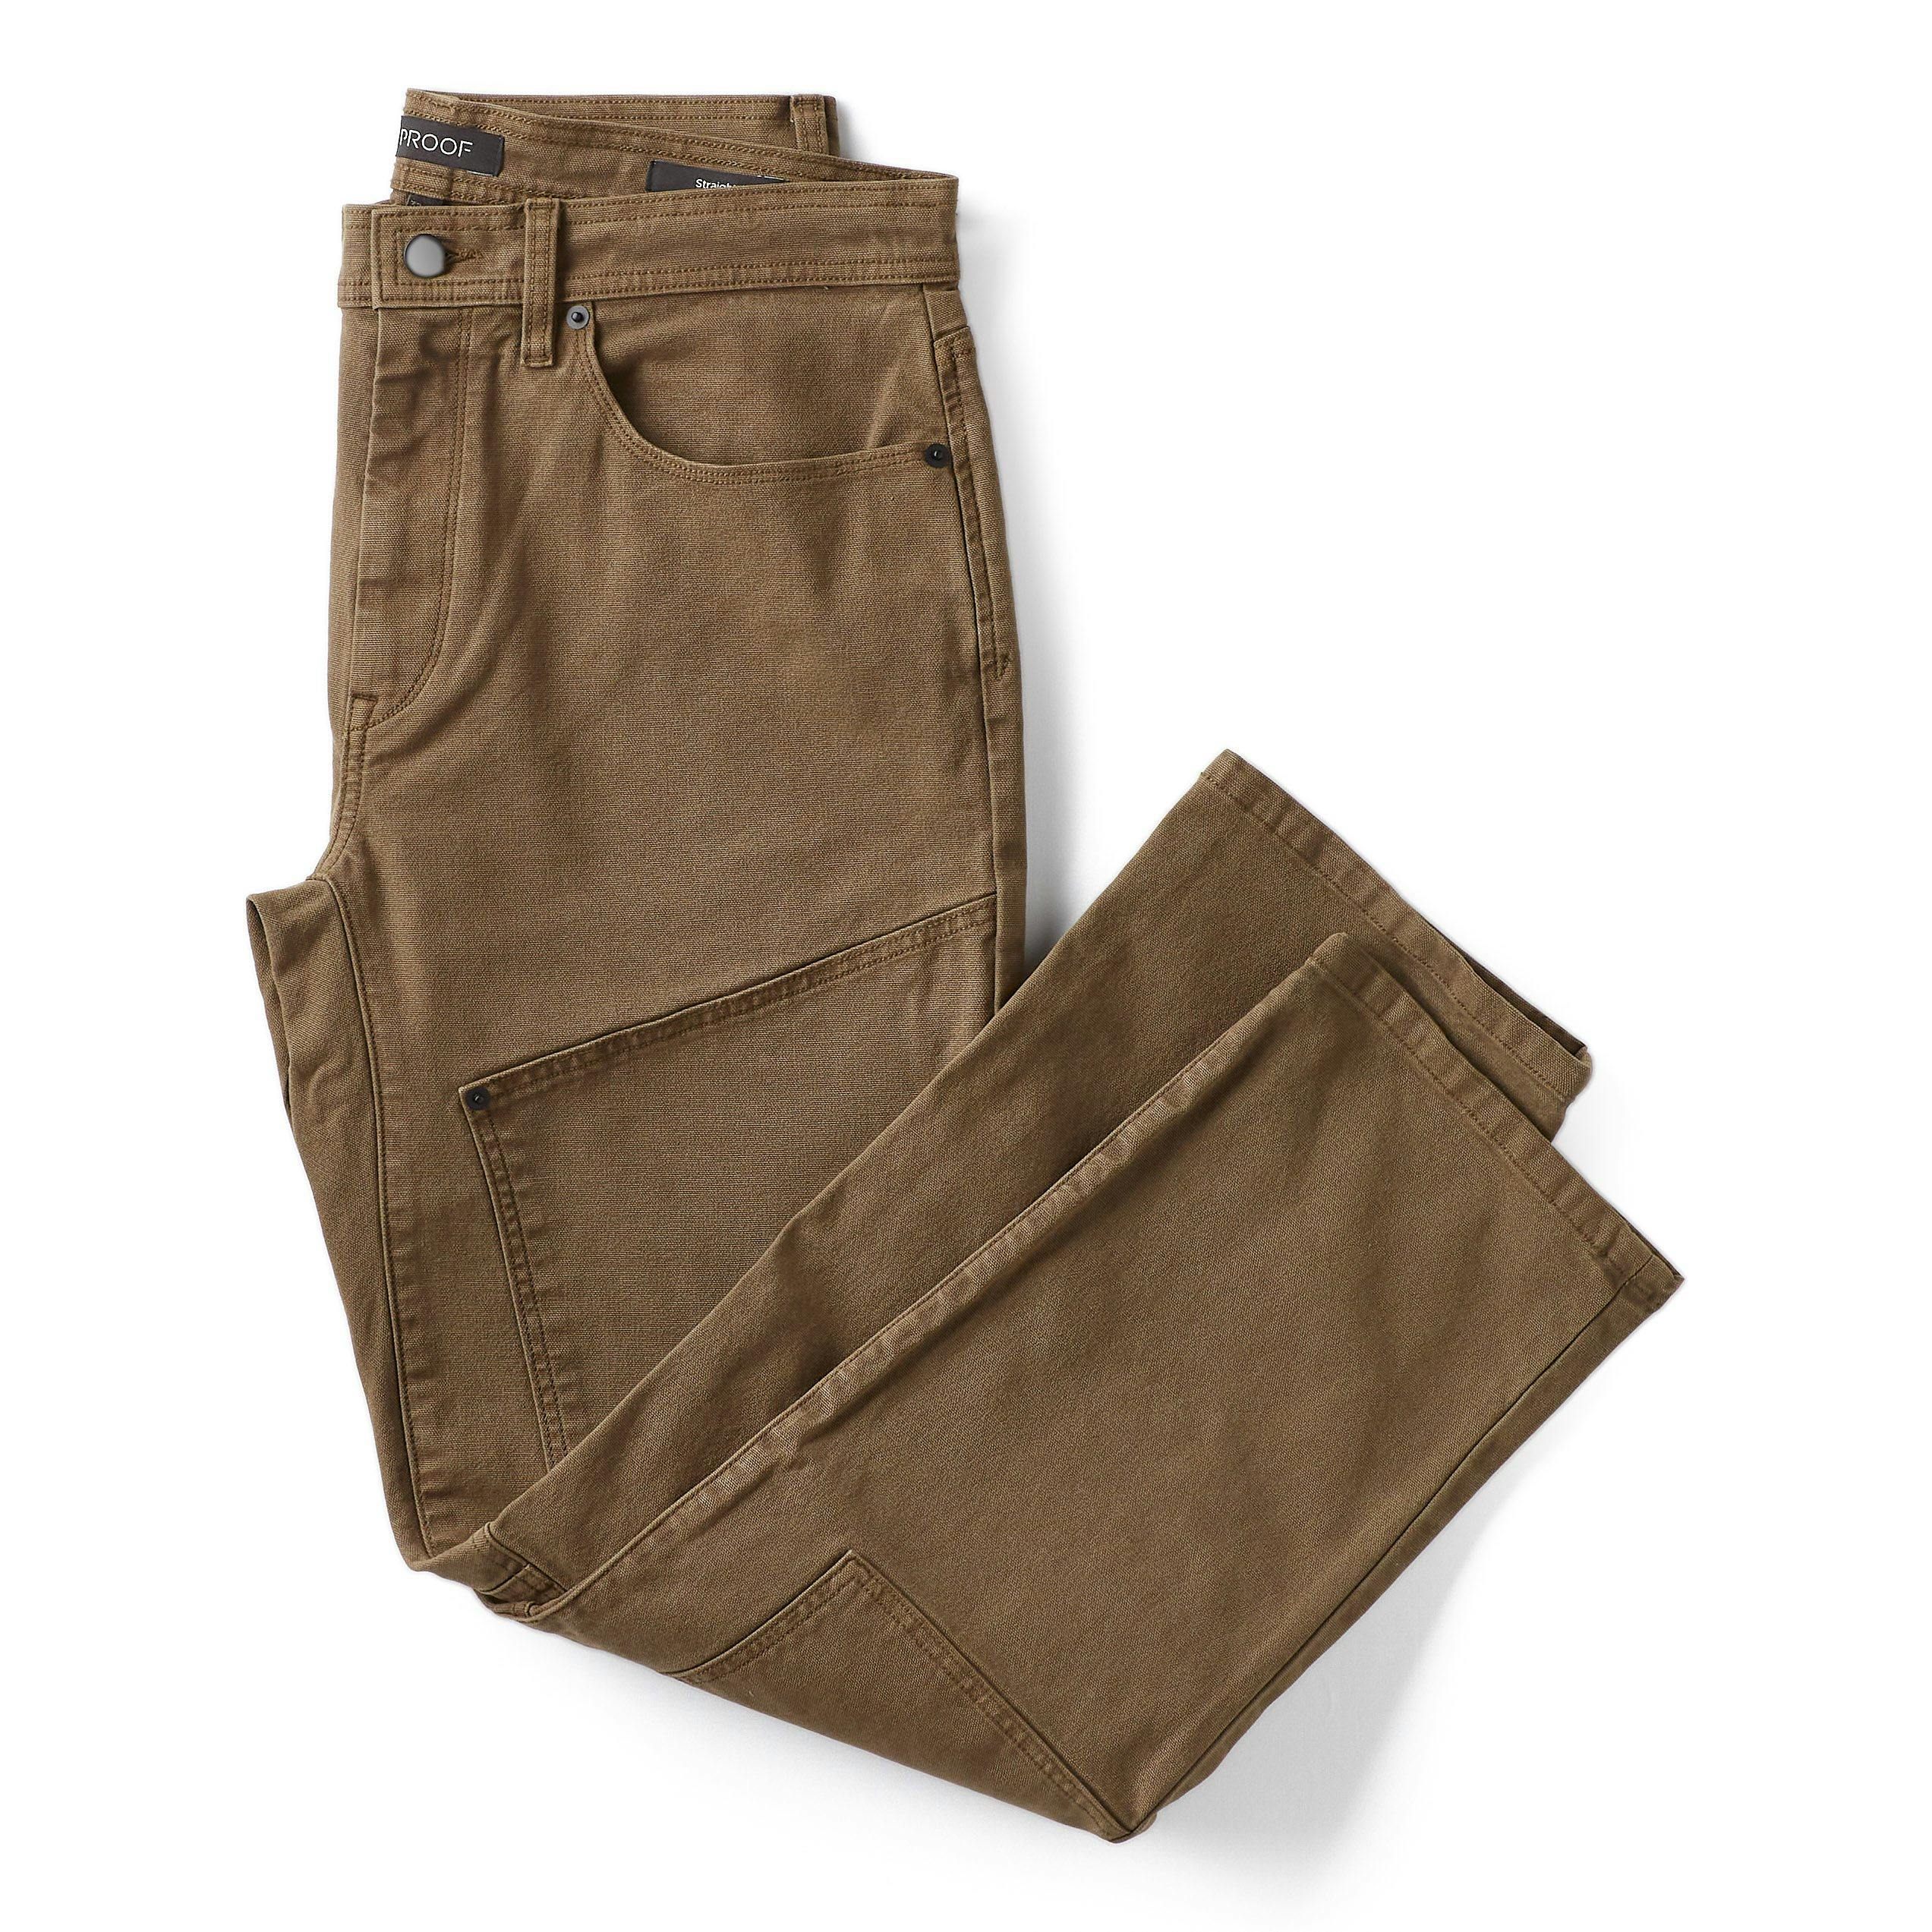 Proof Rover Double-Knee Work Pant - Straight - Dark Olive, Work Pants